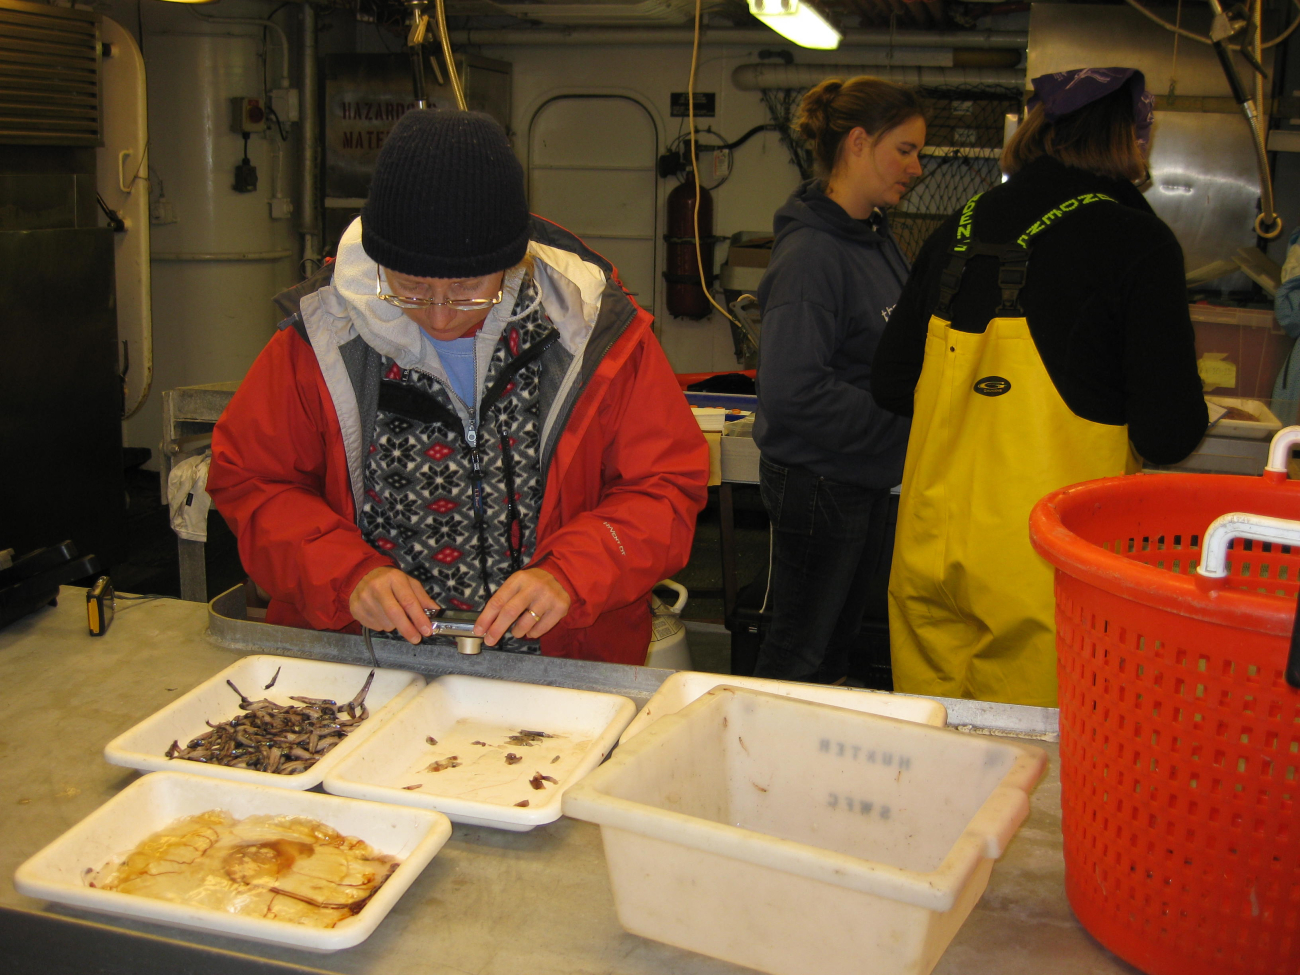 Scientist with sorting trays containing a large jellyfish, numerous lanternfish, and small squid